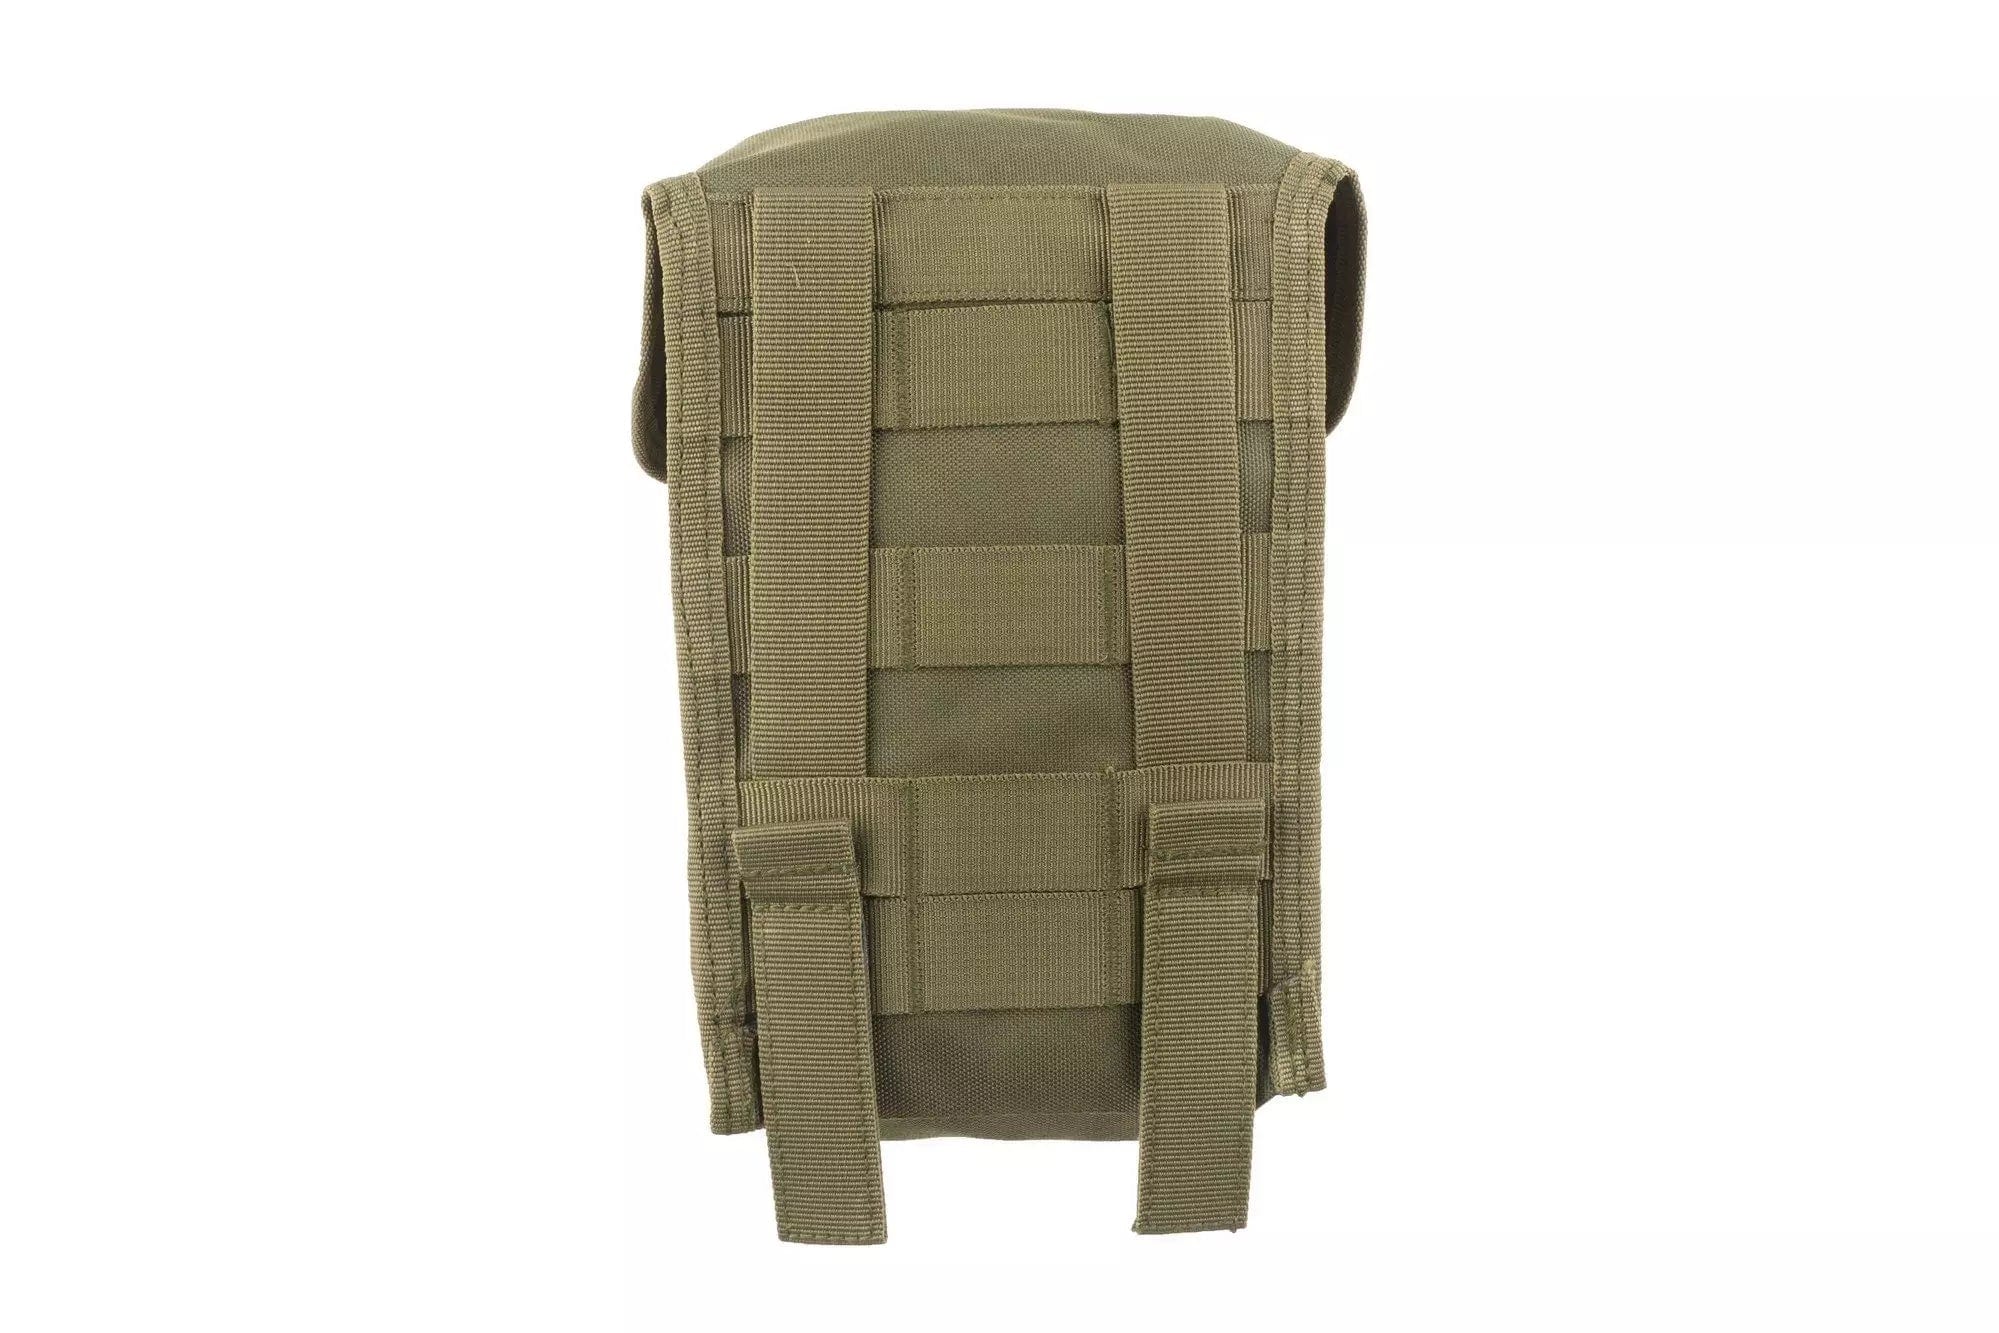 Cargo Pouch - Olive Drab